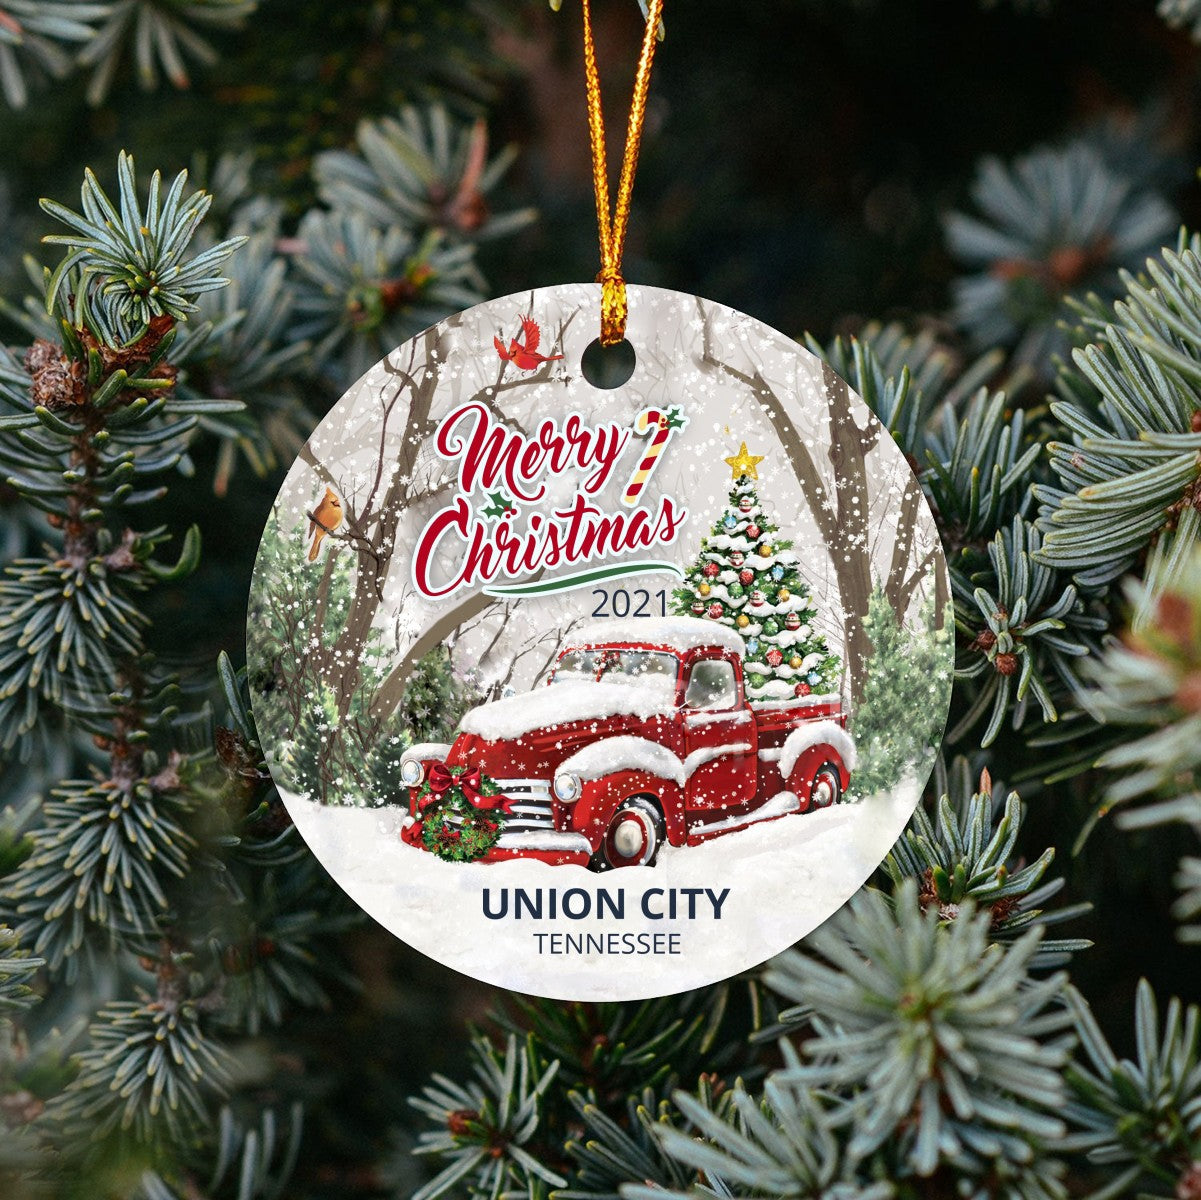 Christmas Tree Ornaments Union City - Ornament With Name City, State Union City Tennessee TN Ornament - Red Truck Xmas Ornaments 3'' Plastic Gift For Family, Friend And Housewarming